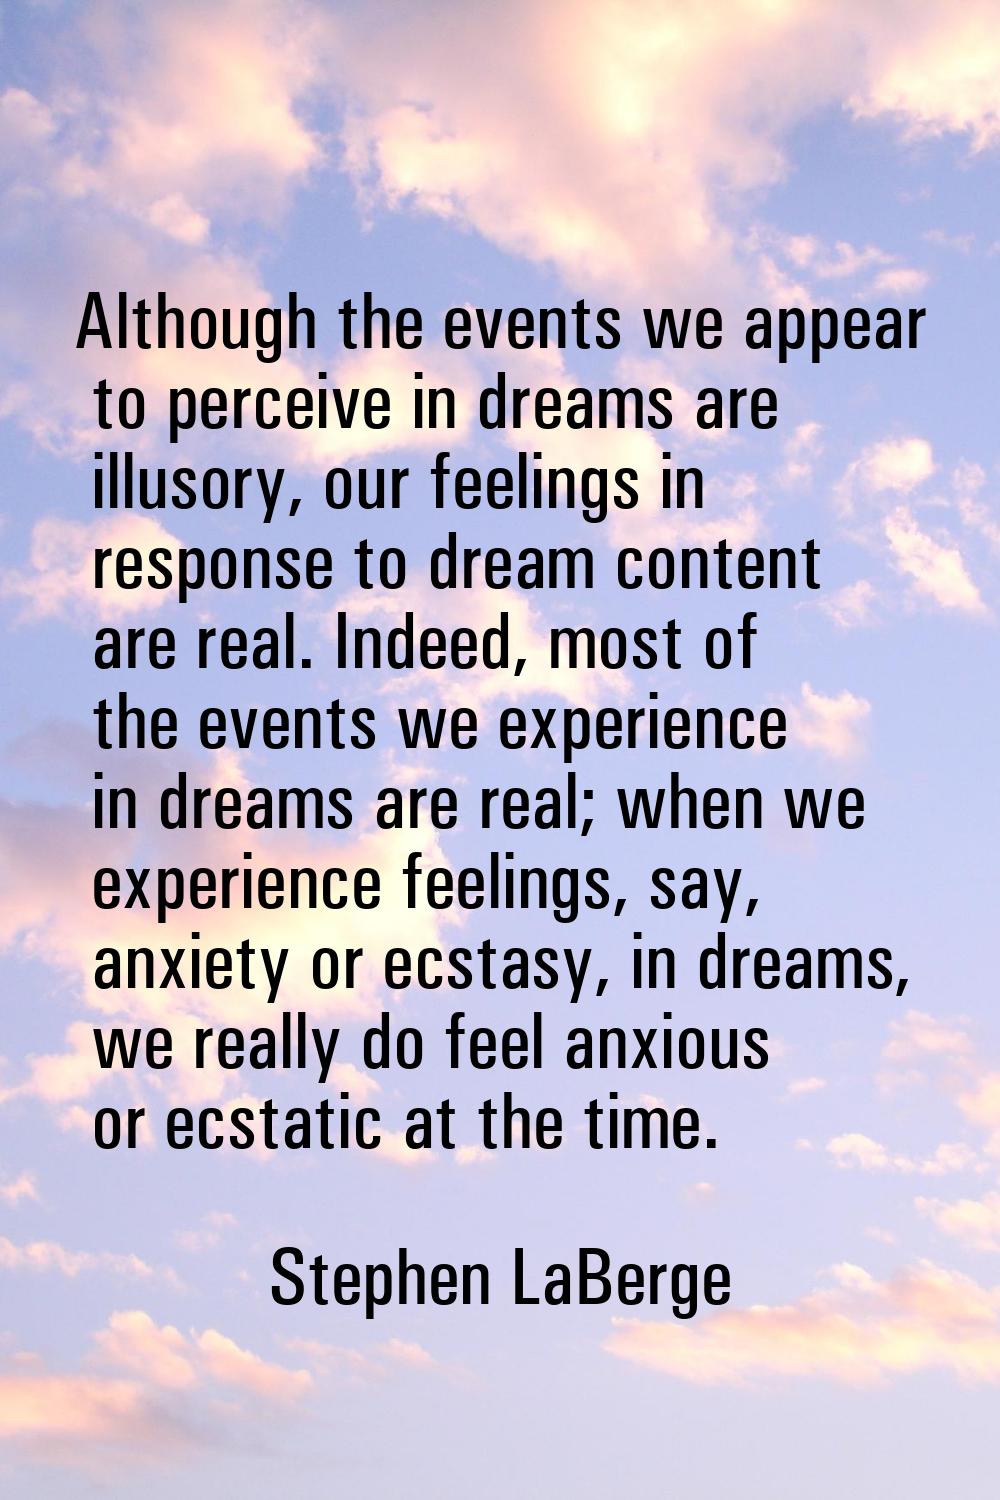 Although the events we appear to perceive in dreams are illusory, our feelings in response to dream